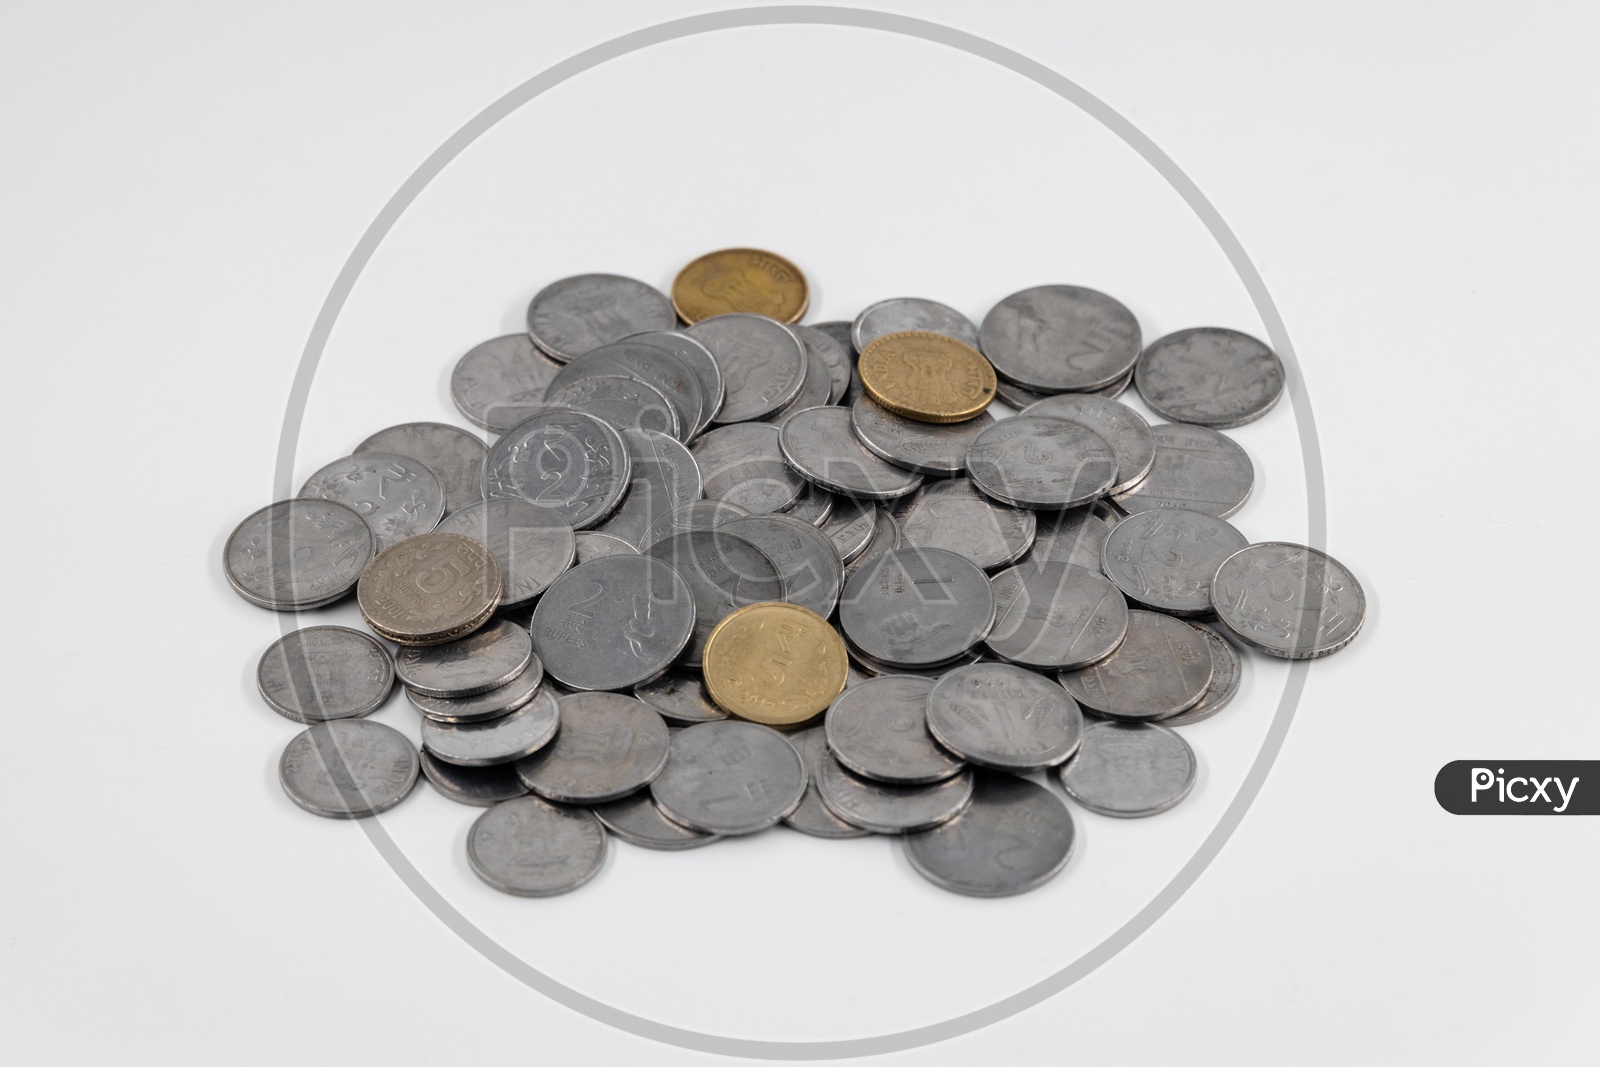 Indian Coin Currency  Metal Currency  Rupee Coins